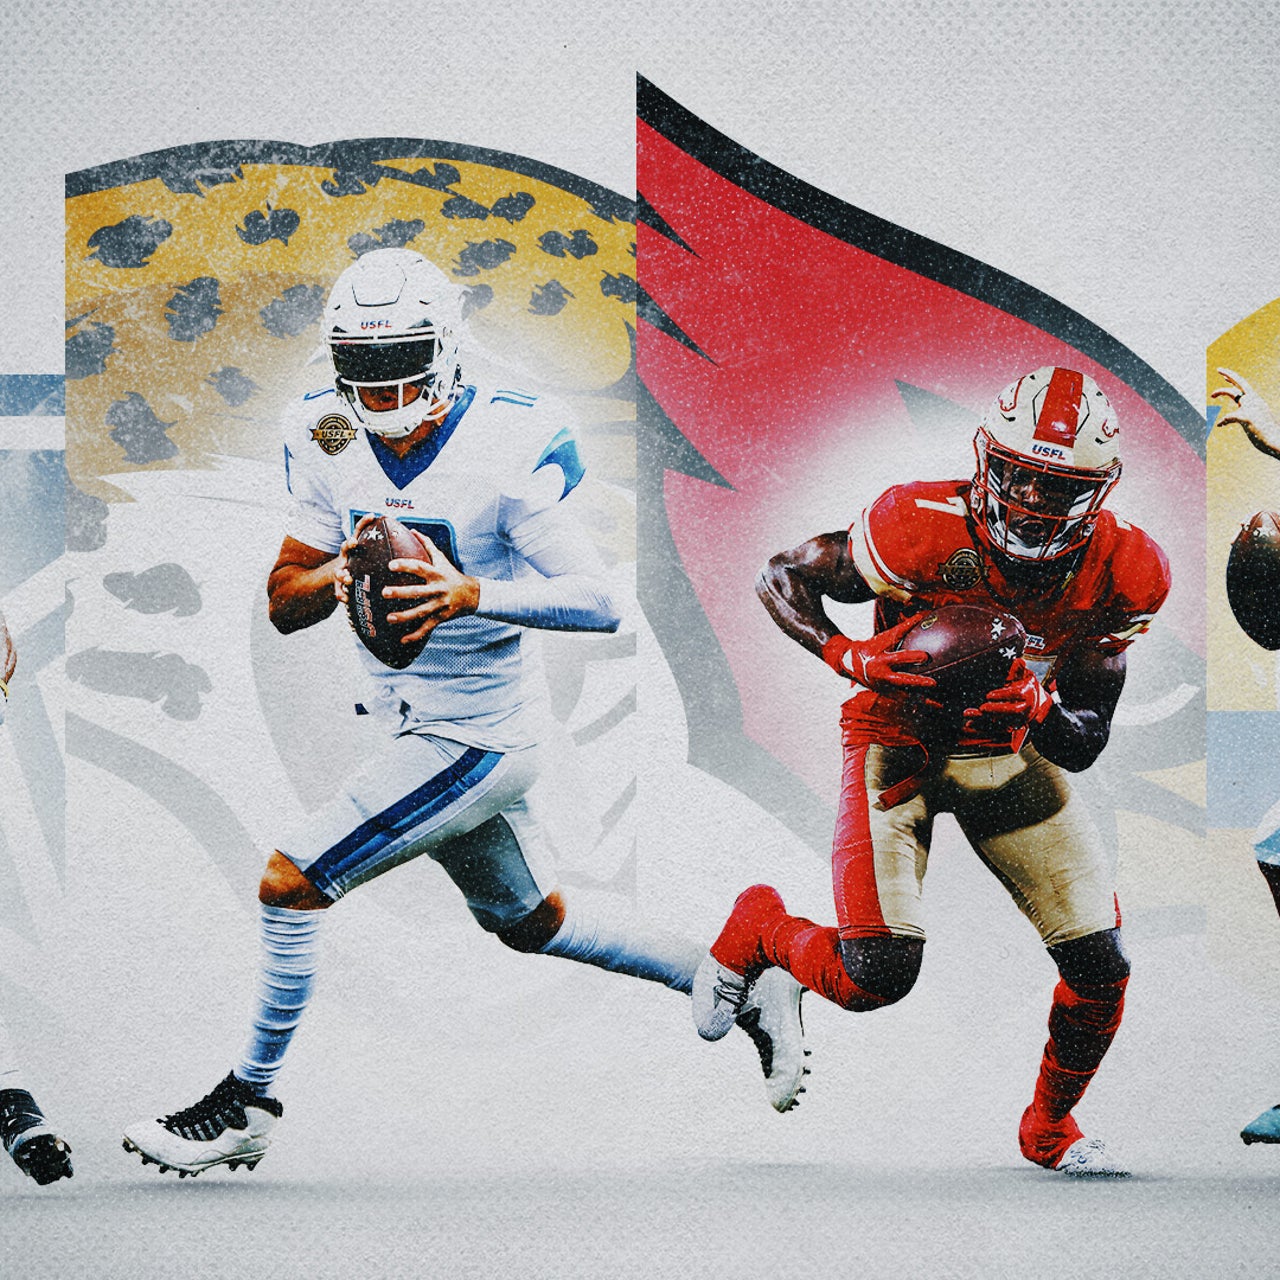 usfl and nfl